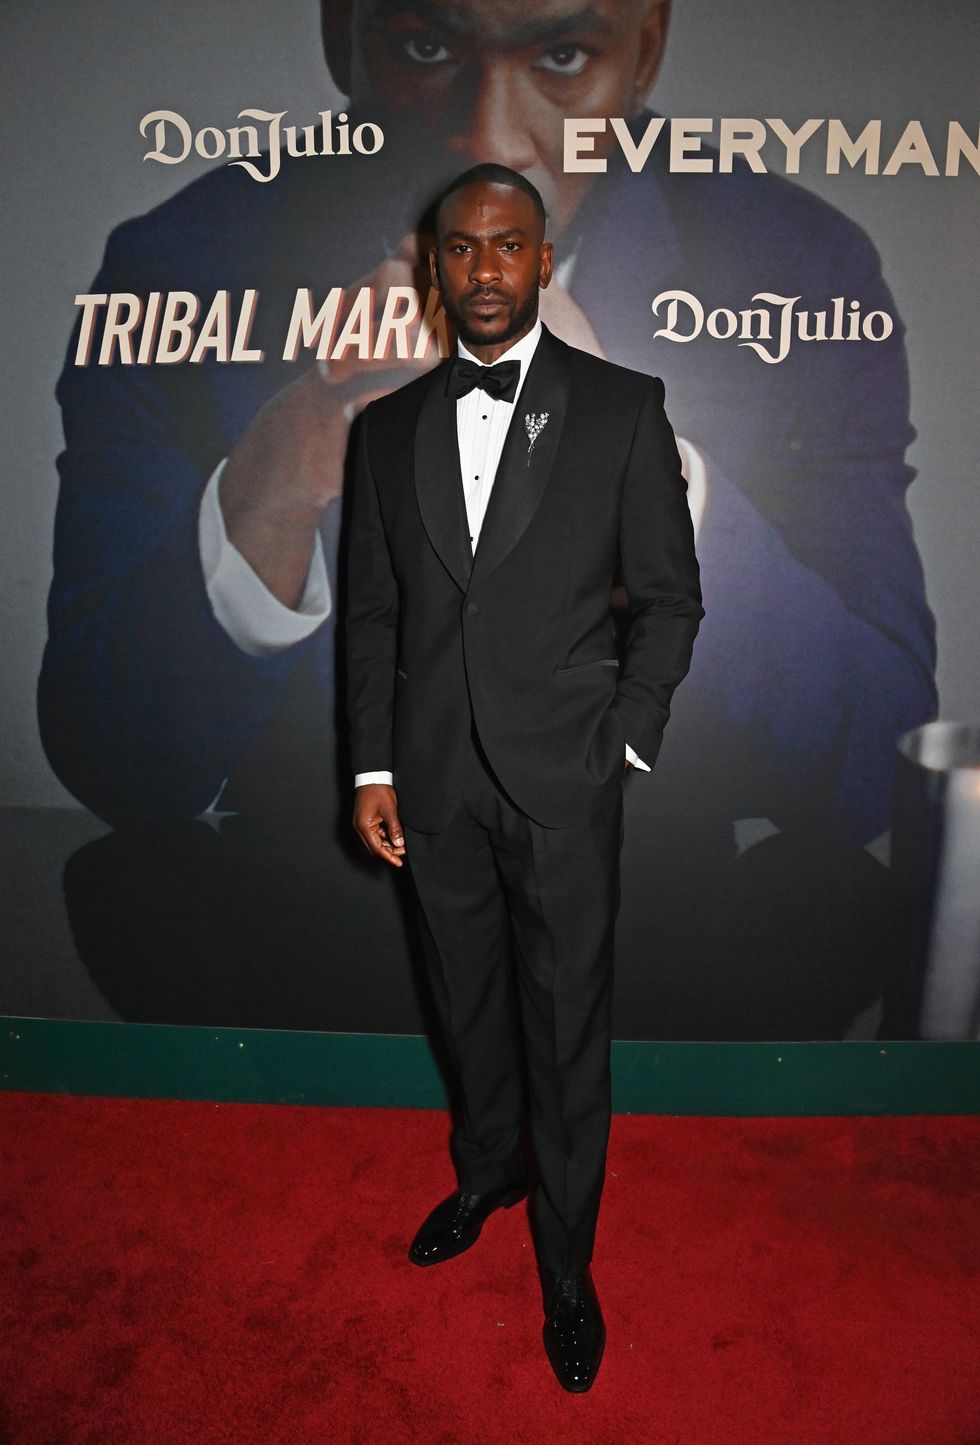 london england january 24 skepta attends the premiere of quottribal markquot a film by skepta with don julio 1942 and everyman cinema on january 24 2024 in london england photo by dave benett